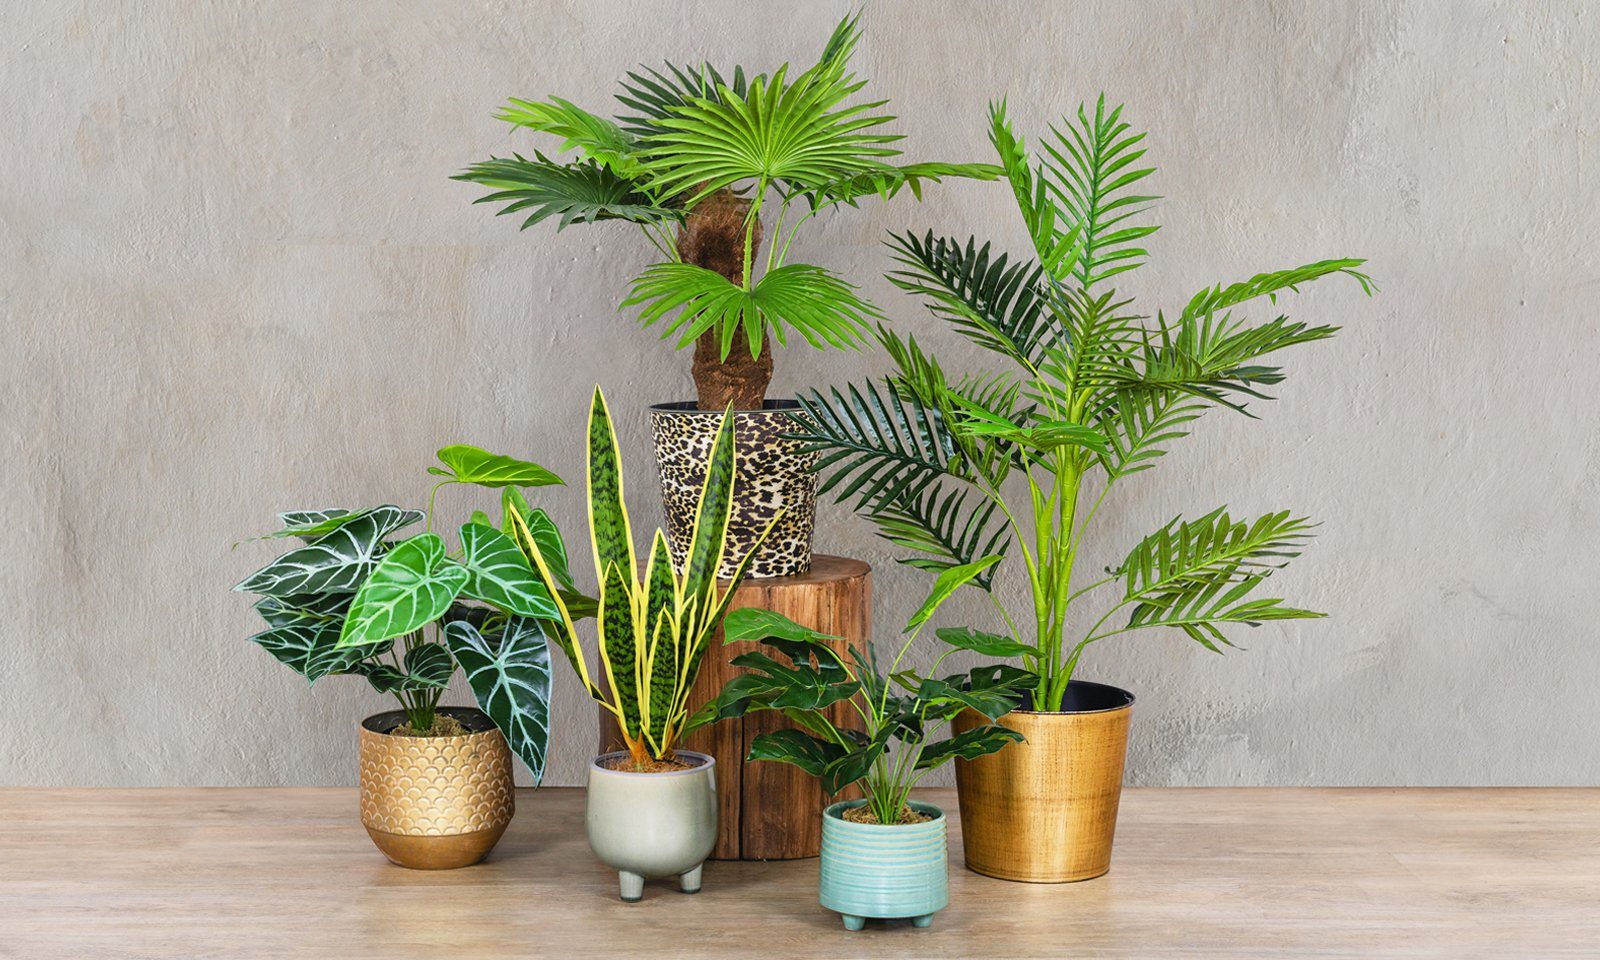 HOW TO DECORATE YOUR LIVING ROOM WITH PLANTS